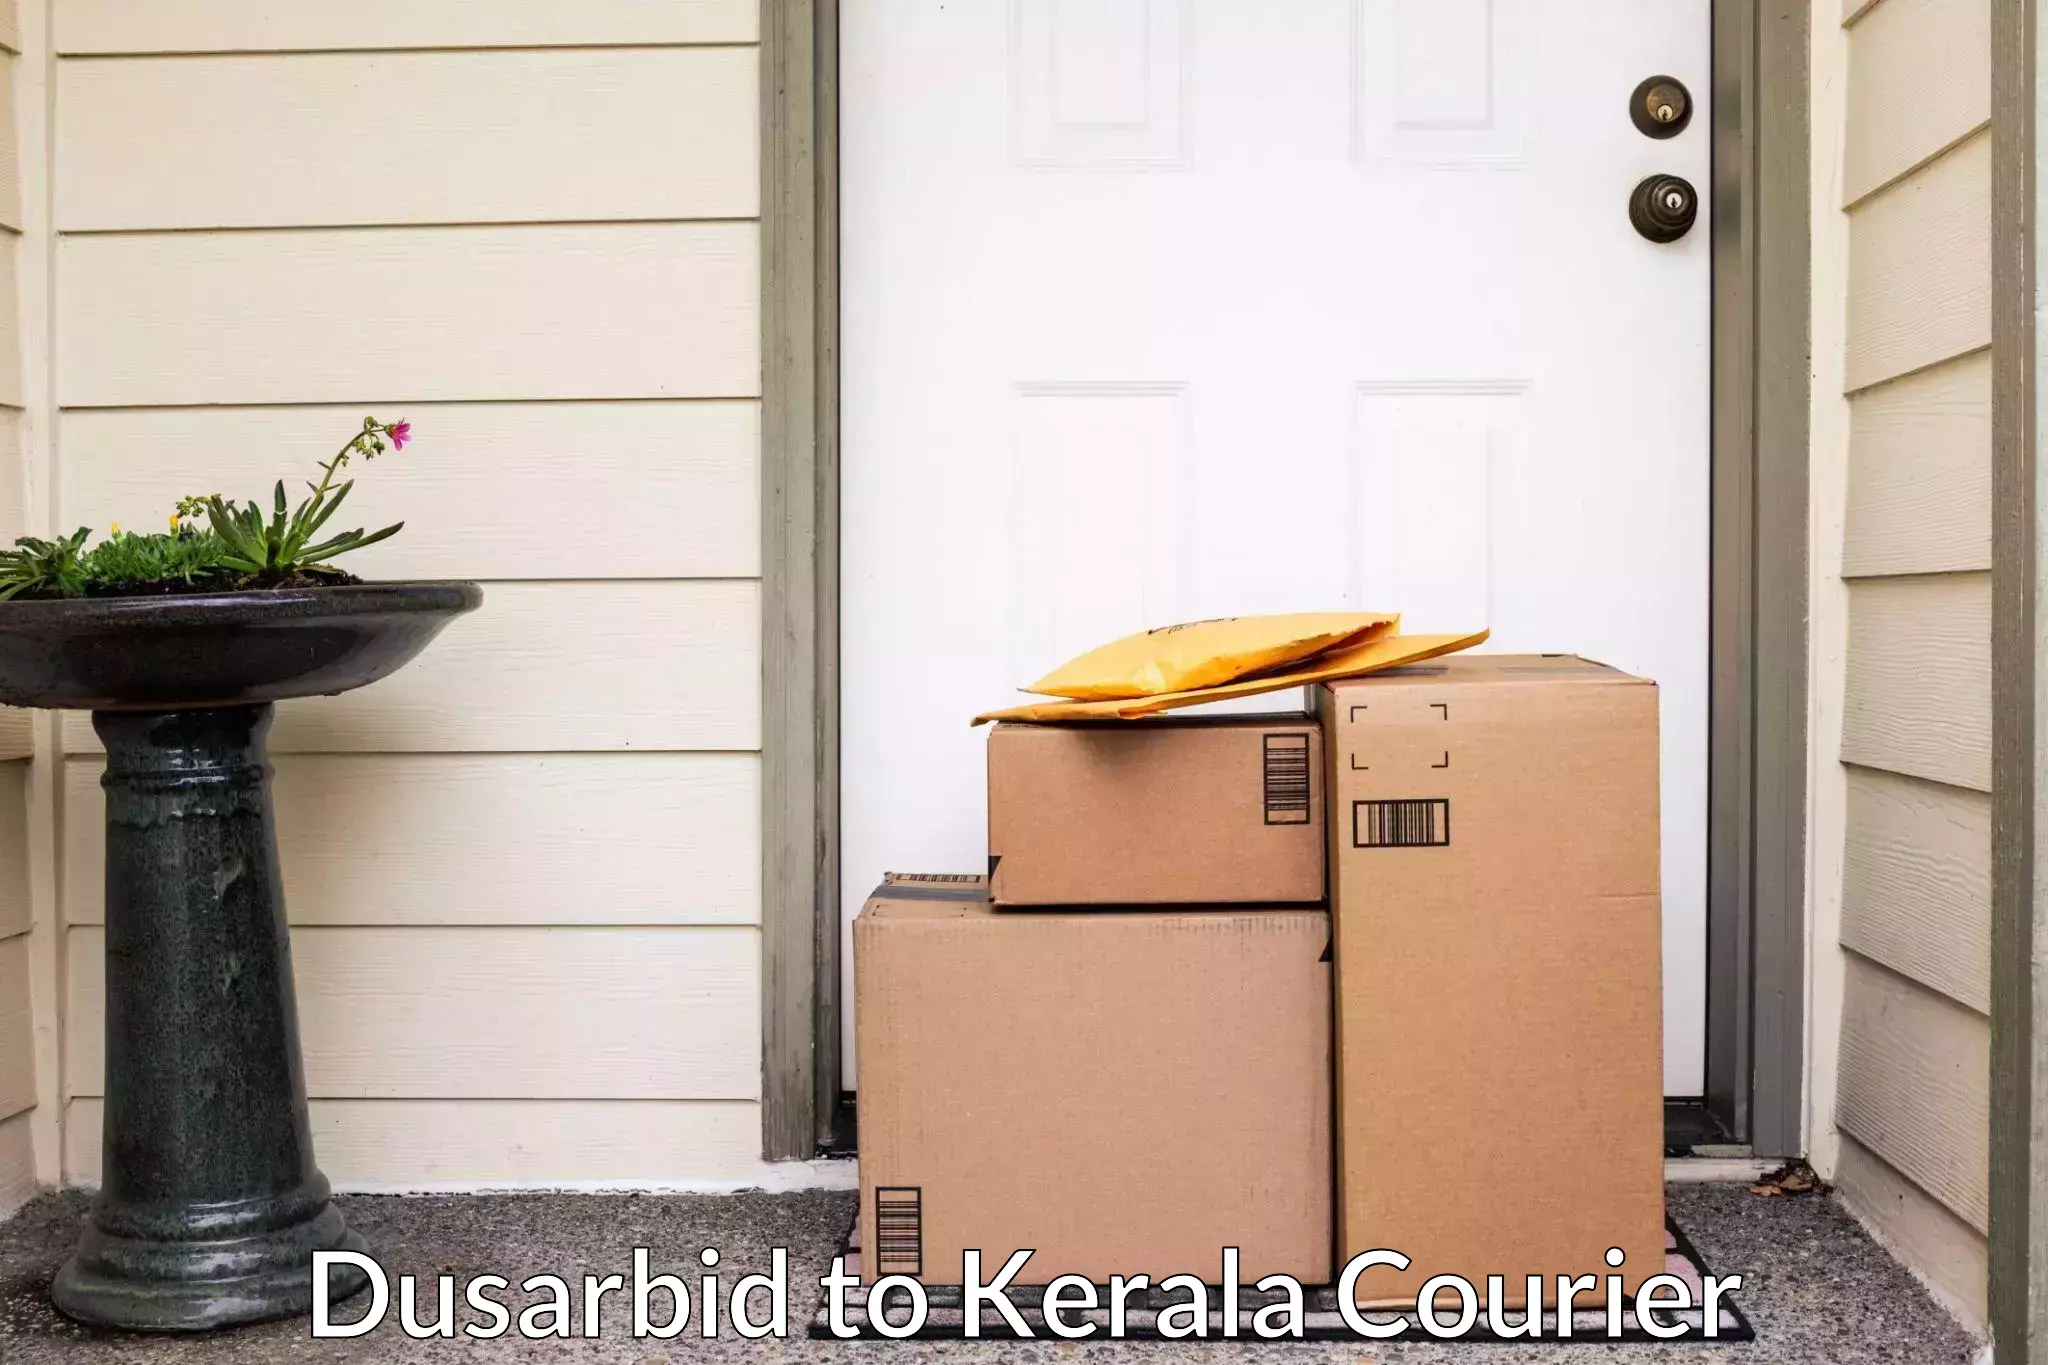 Quality moving services Dusarbid to Kerala